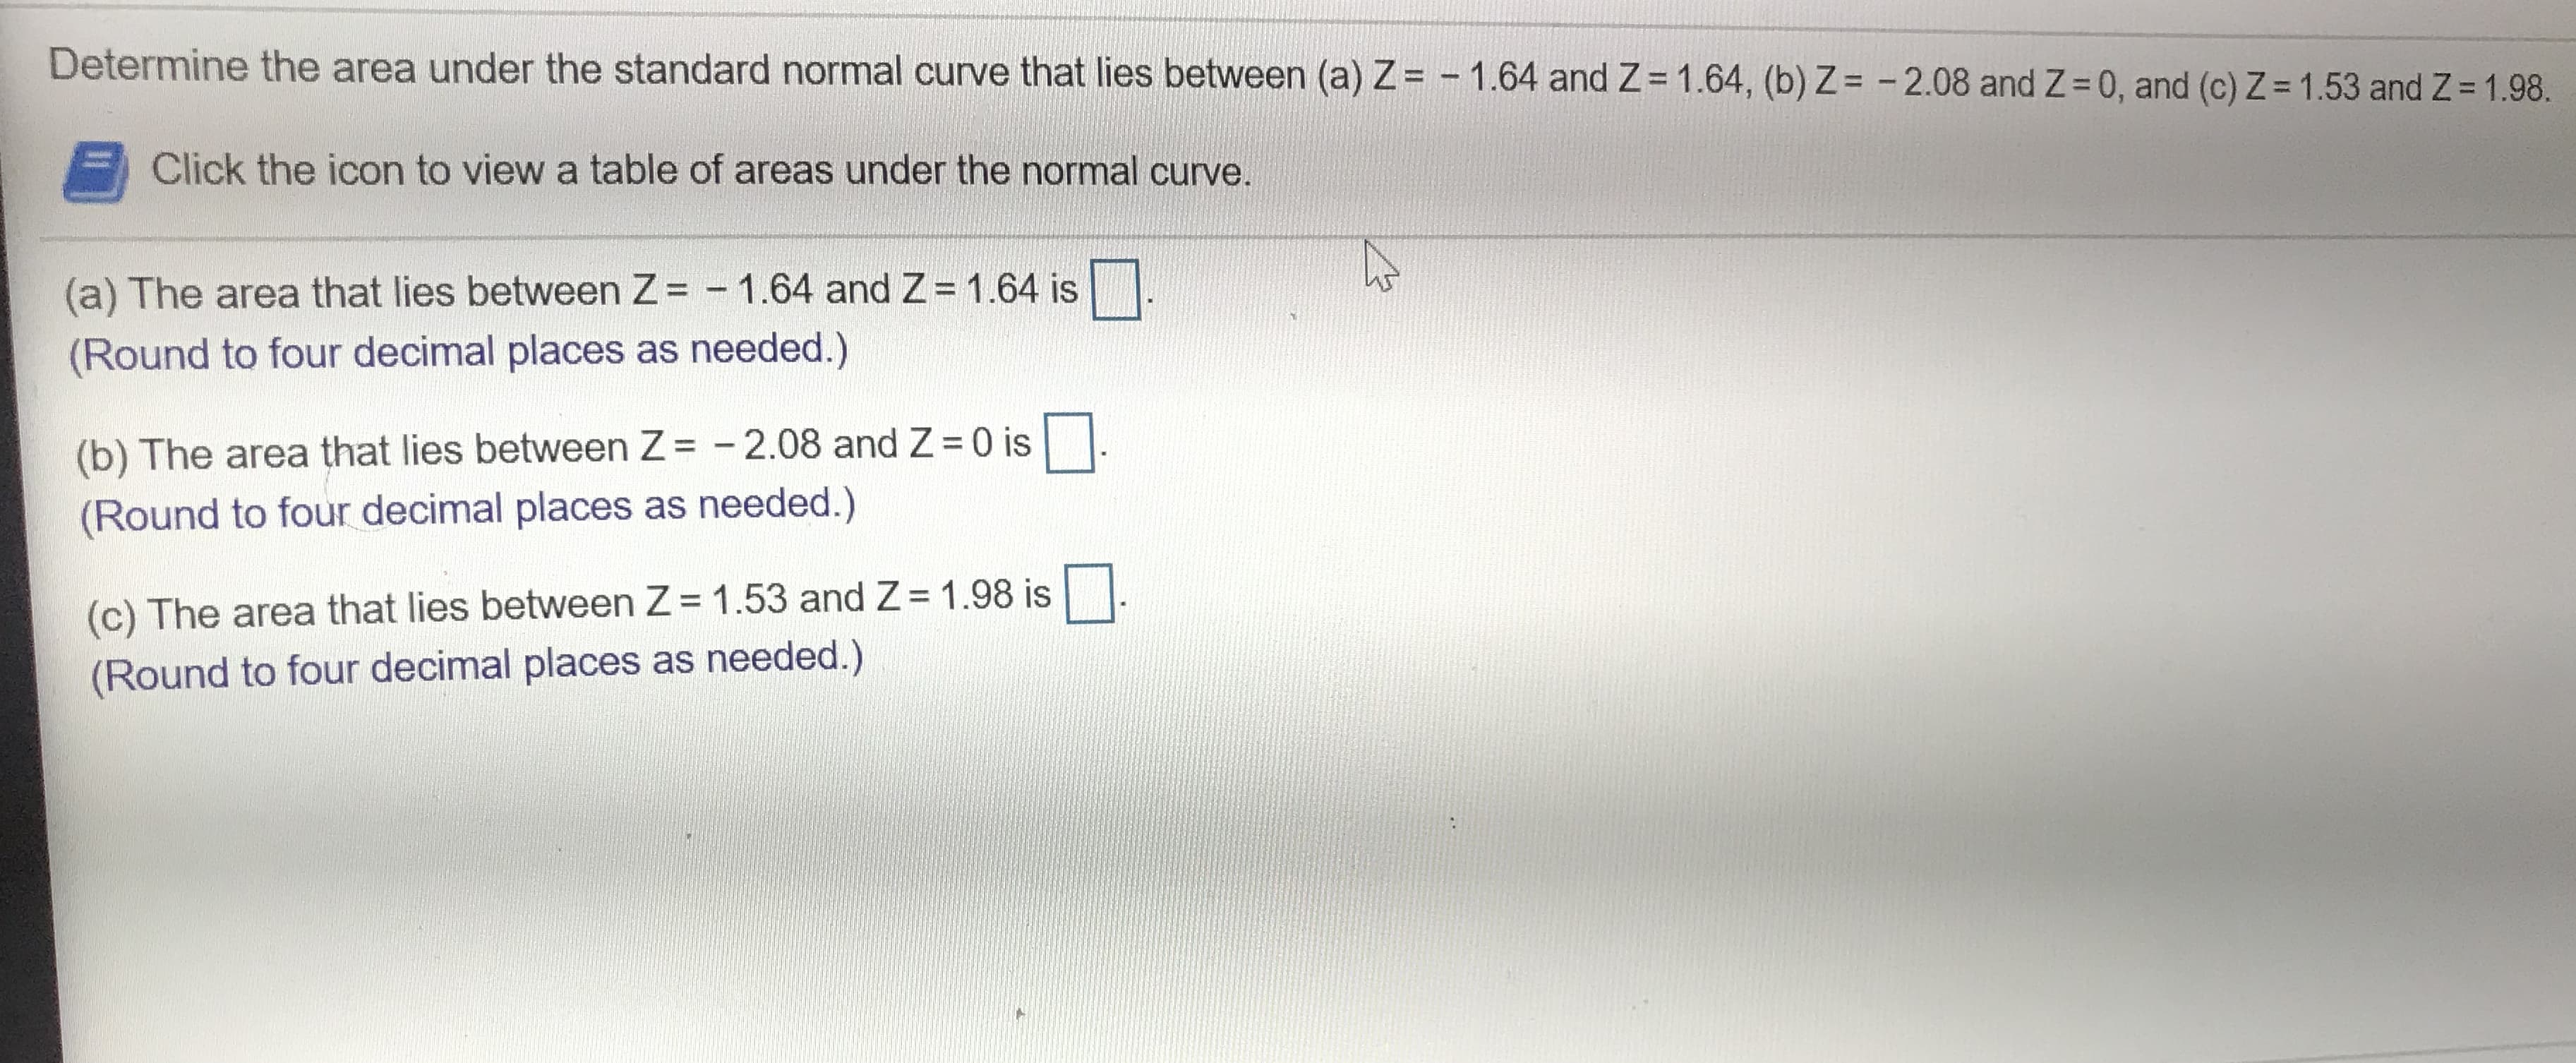 Determine the area under the standard normal curve that lies between (a) Z= -1.64 and Z
1.64, (b) Z = -2.08 and Z
0, and (c) Z = 1.53 and Z 1.98.
Click the icon to view a table of areas under the normal curve.
1.64 is
(a) The area that lies between Z = -1.64 and Z
(Round to four decimal places as needed.)
0 is
(b) The area that lies between Z = -2.08 and Z
(Round to four decimal places as needed.)
(c) The area that lies between Z 1.53 and Z 1.98 is
(Round to four decimal places as needed.)
